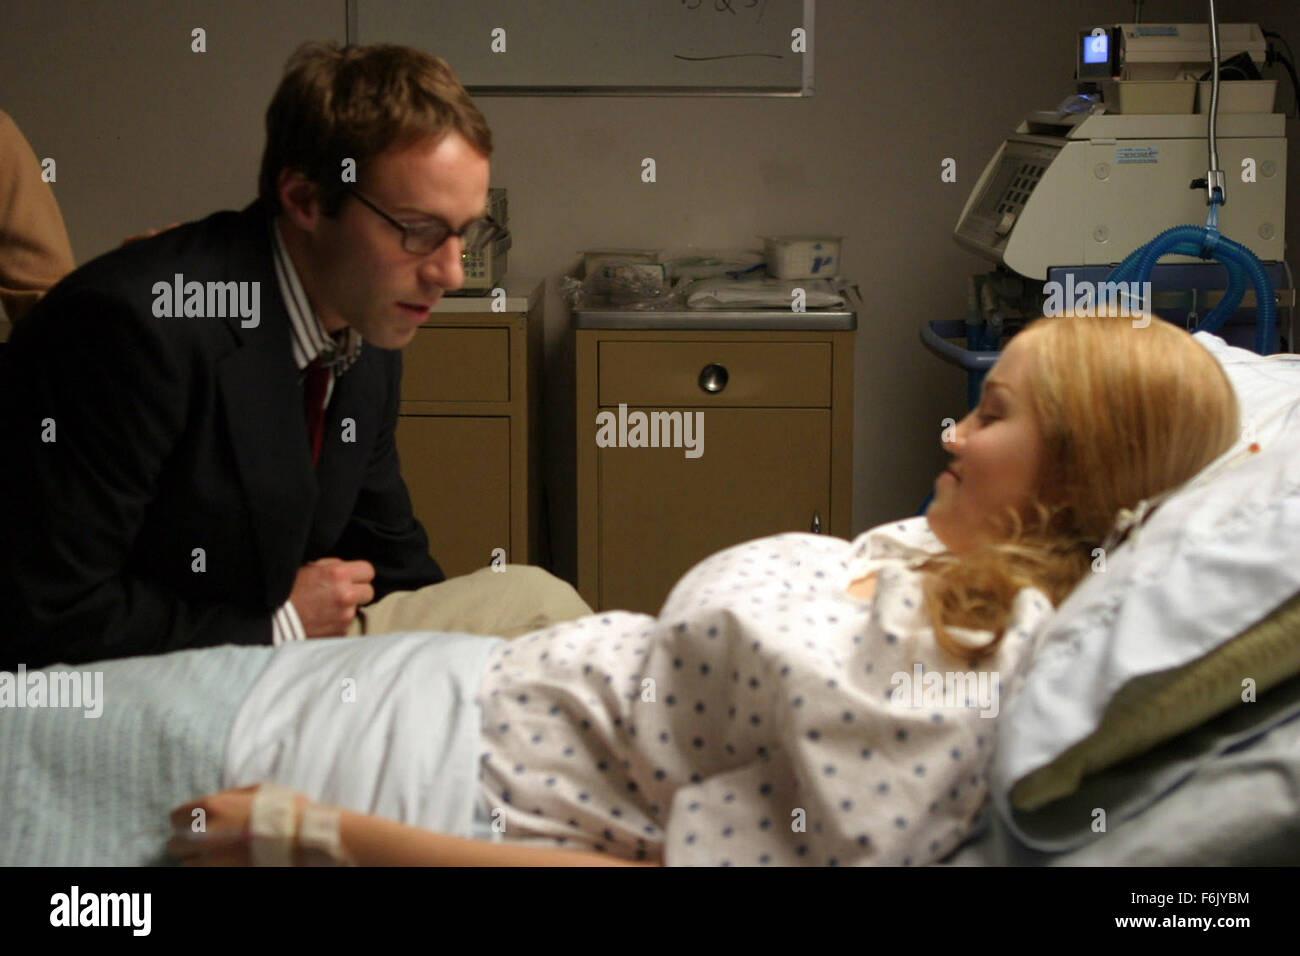 RELEASE DATE: April 23, 2005. MOVIE TITLE: The Sisters. STUDIO: Persistent Entertainment. PLOT: Based on Anton Chekov'sThe Three Sisters about siblings living in a college town who struggle with the death of their father and try to reconcile relationships in their own lives. PICTURED: ALESSANDRO NIVOLA as Andrew Prior and ERIKA CHRISTENSEN as Irene Prior. Stock Photo